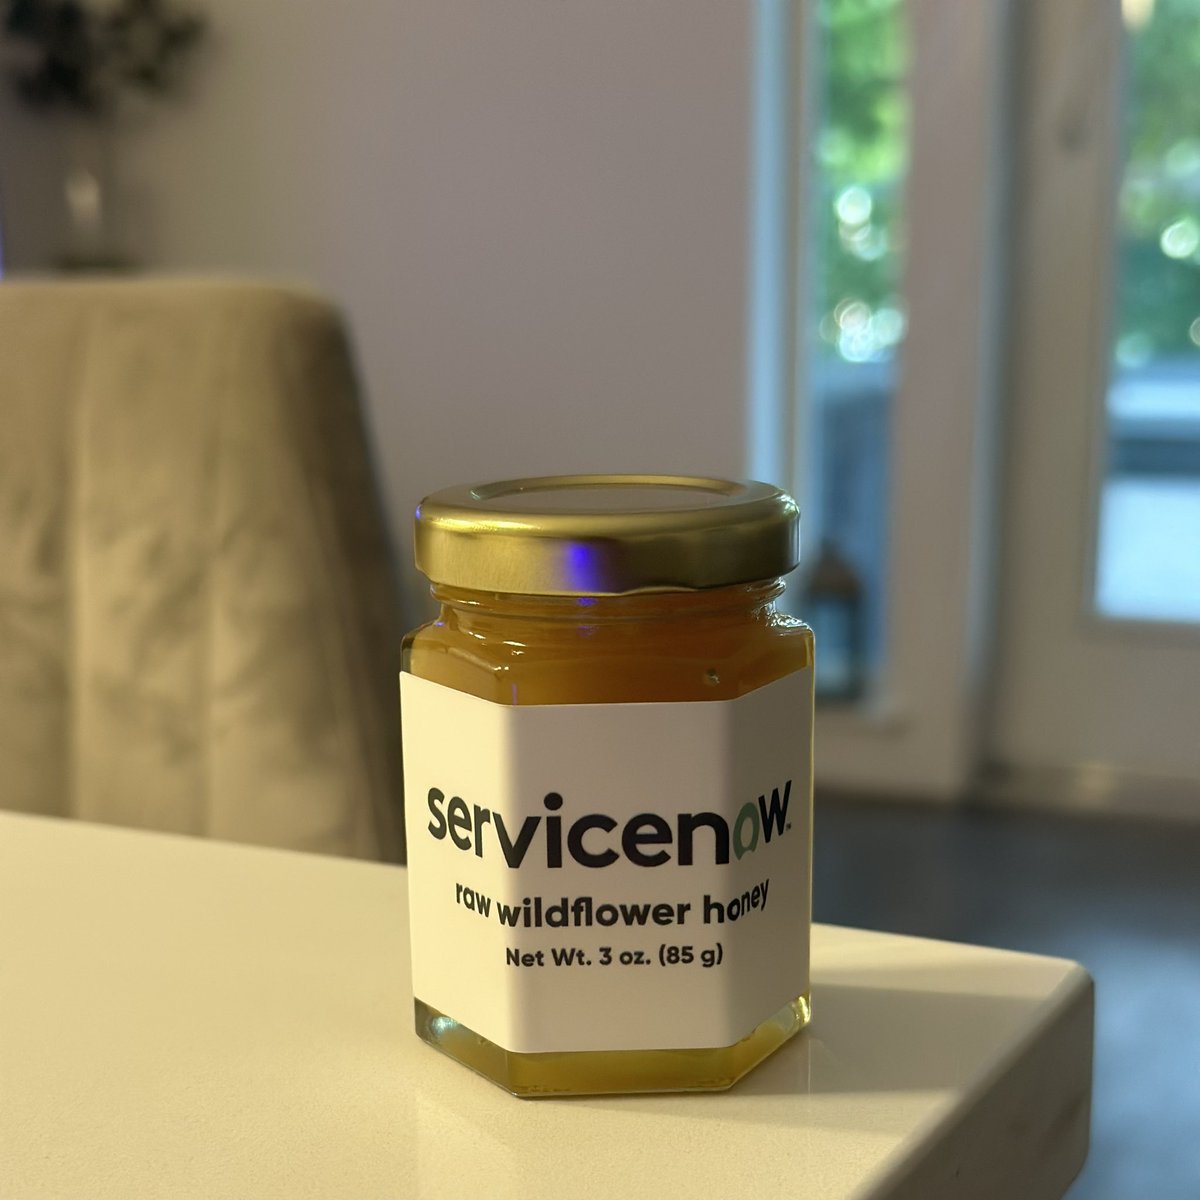 A wonderful sweet treat was waiting for me at the office today. Big thanks to Cate from our awesome Workplace Services Team. There are so many great things about life at @ServiceNow. Harvesting our own honey at our #SantaClara campus is just one of them!